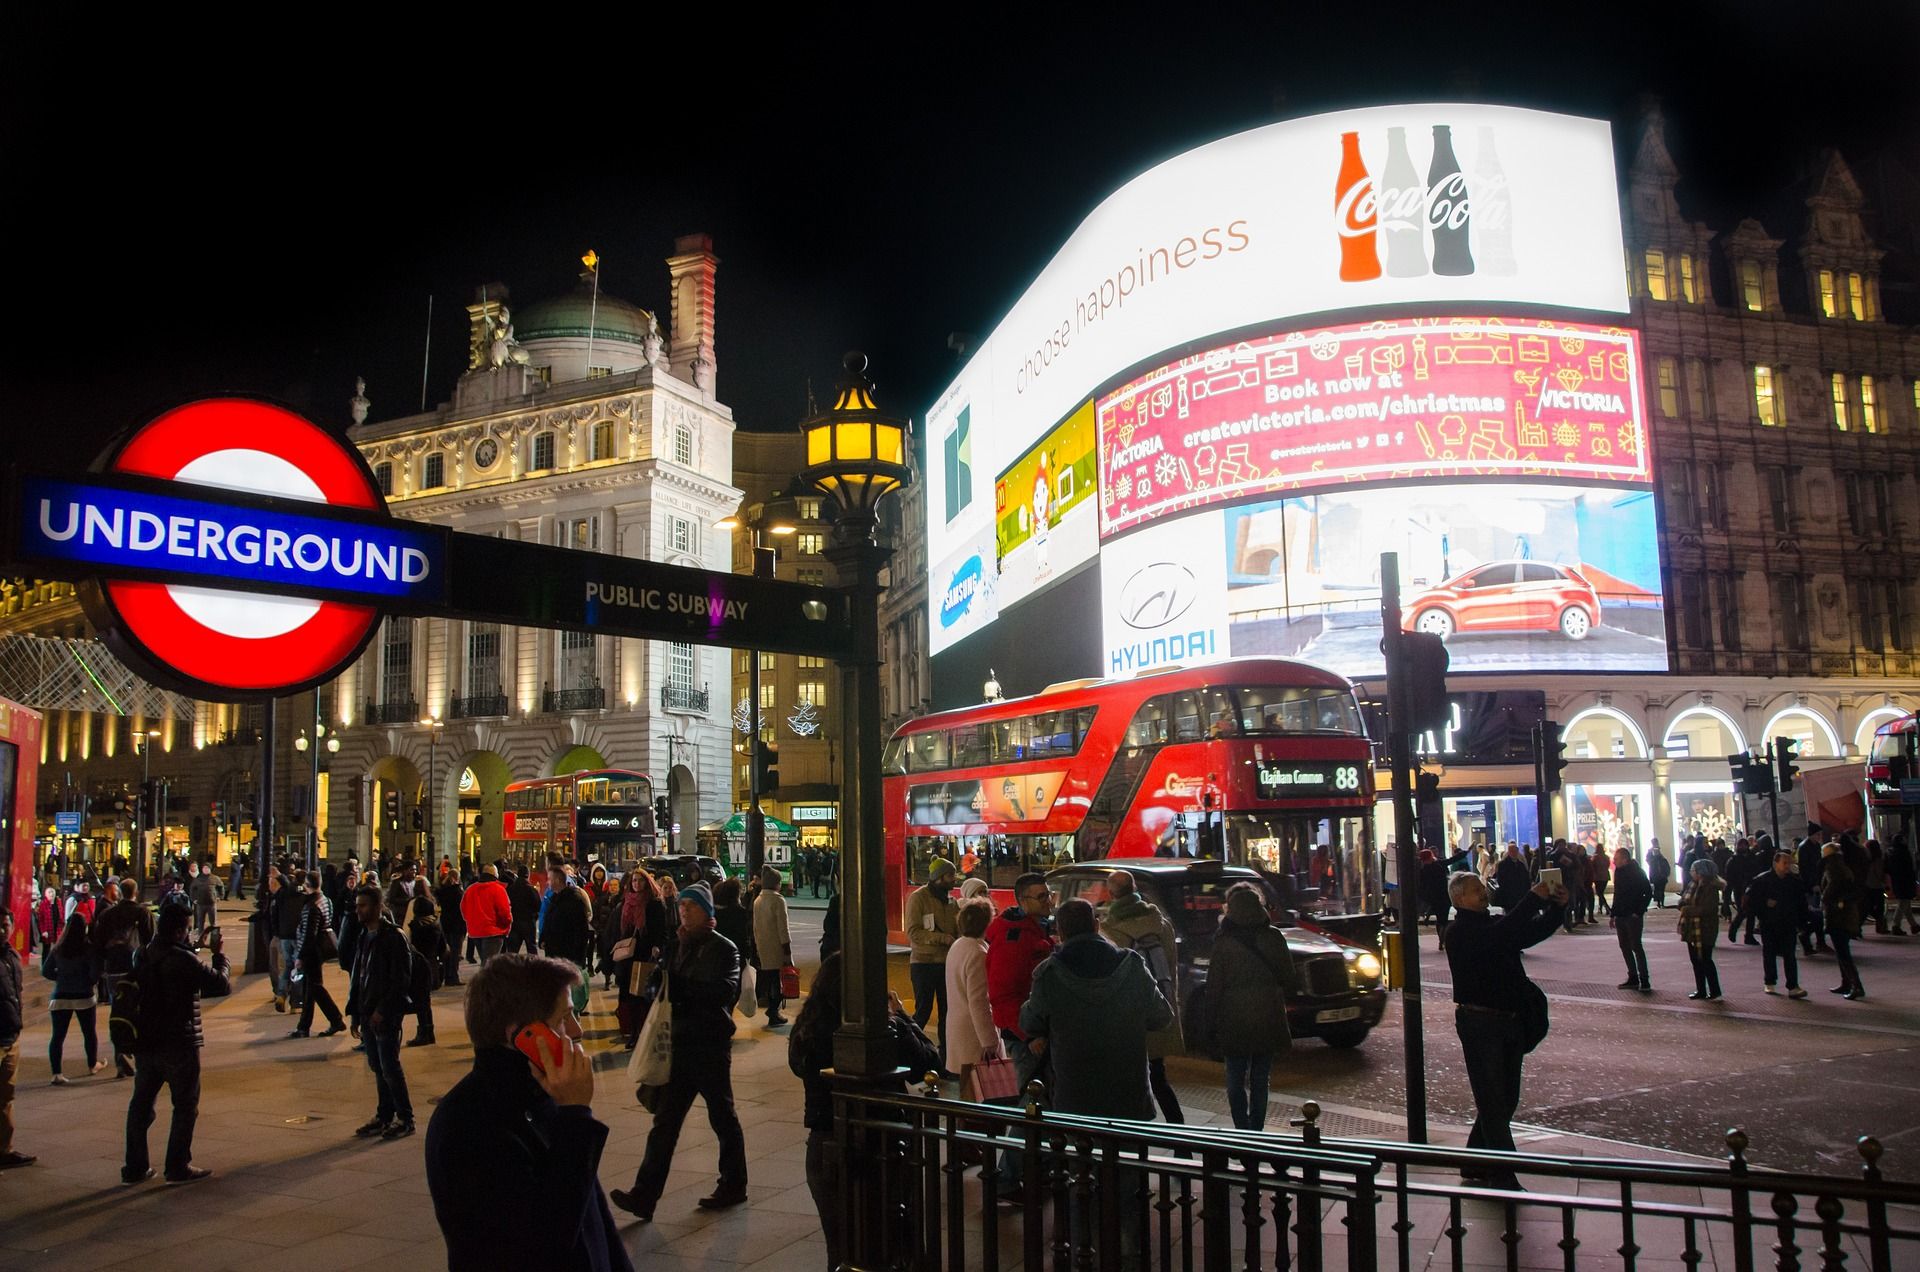 Shopping in Piccadilly Circus